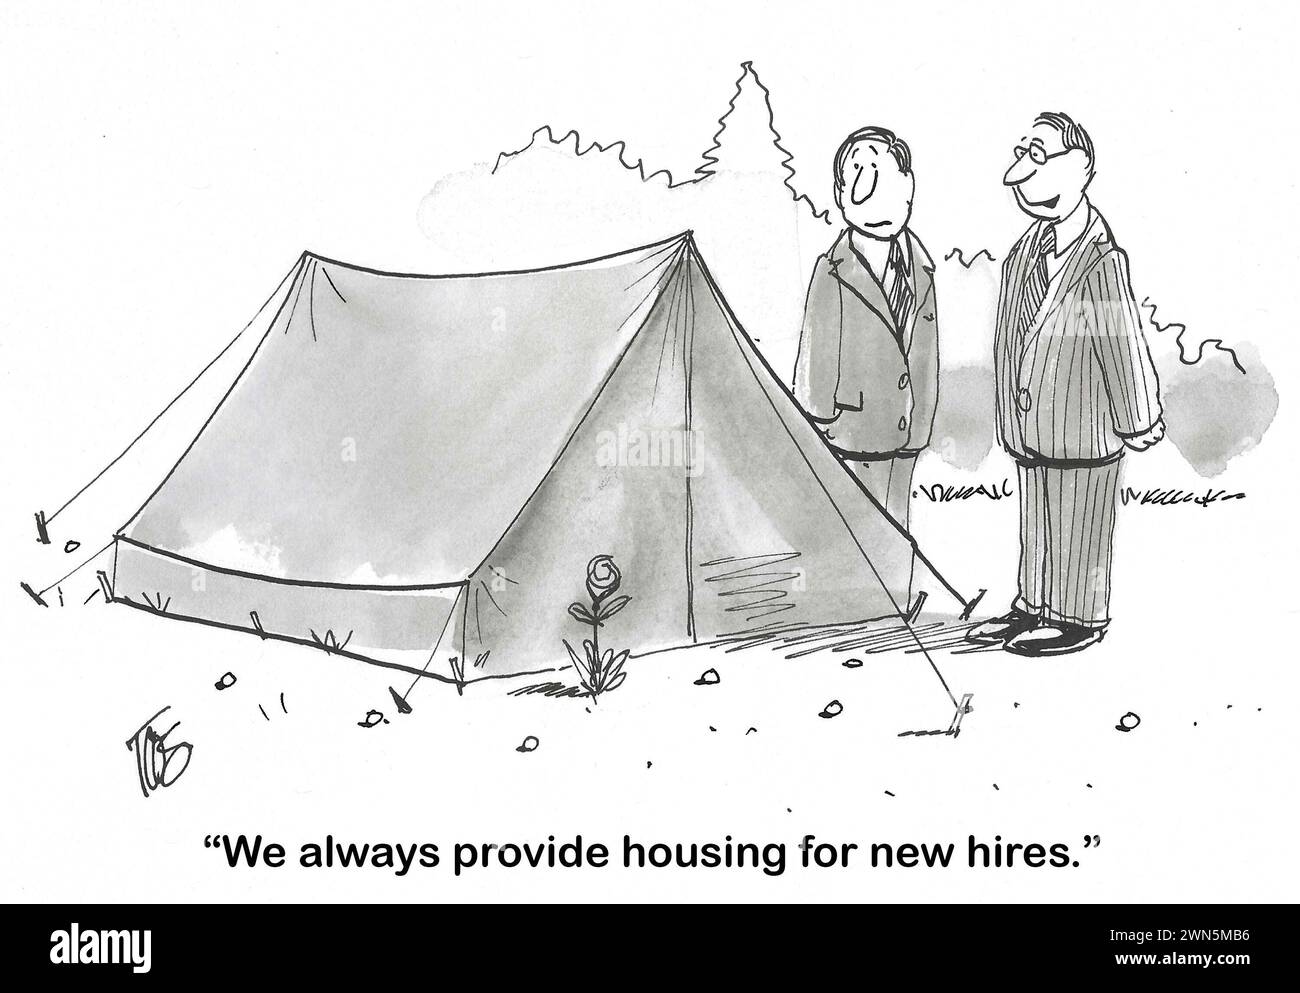 BW cartoon showing that the housing for professional new hires is a tent. Stock Photo